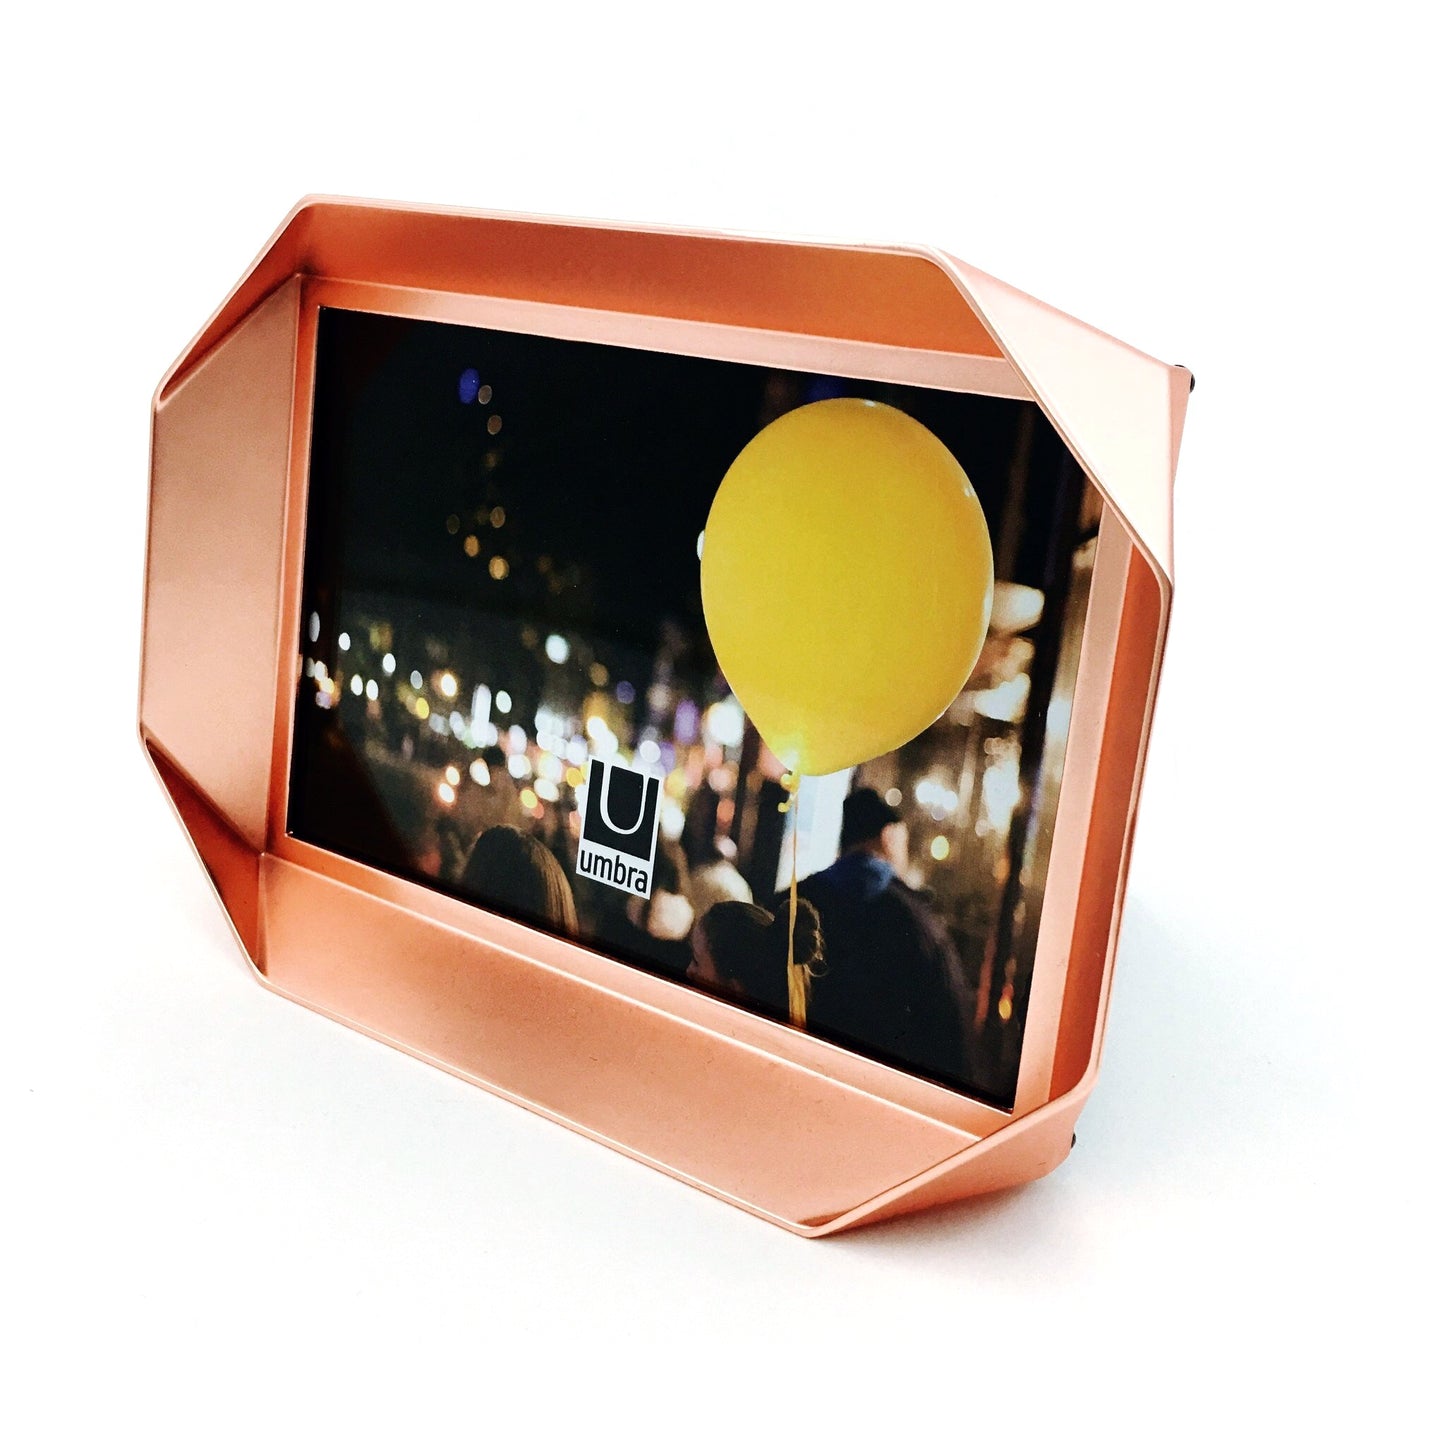 "Fotobend" Picture Frame in Copper by Umbra - 4 x 6 inches - by Umbra - K. A. Artist Shop